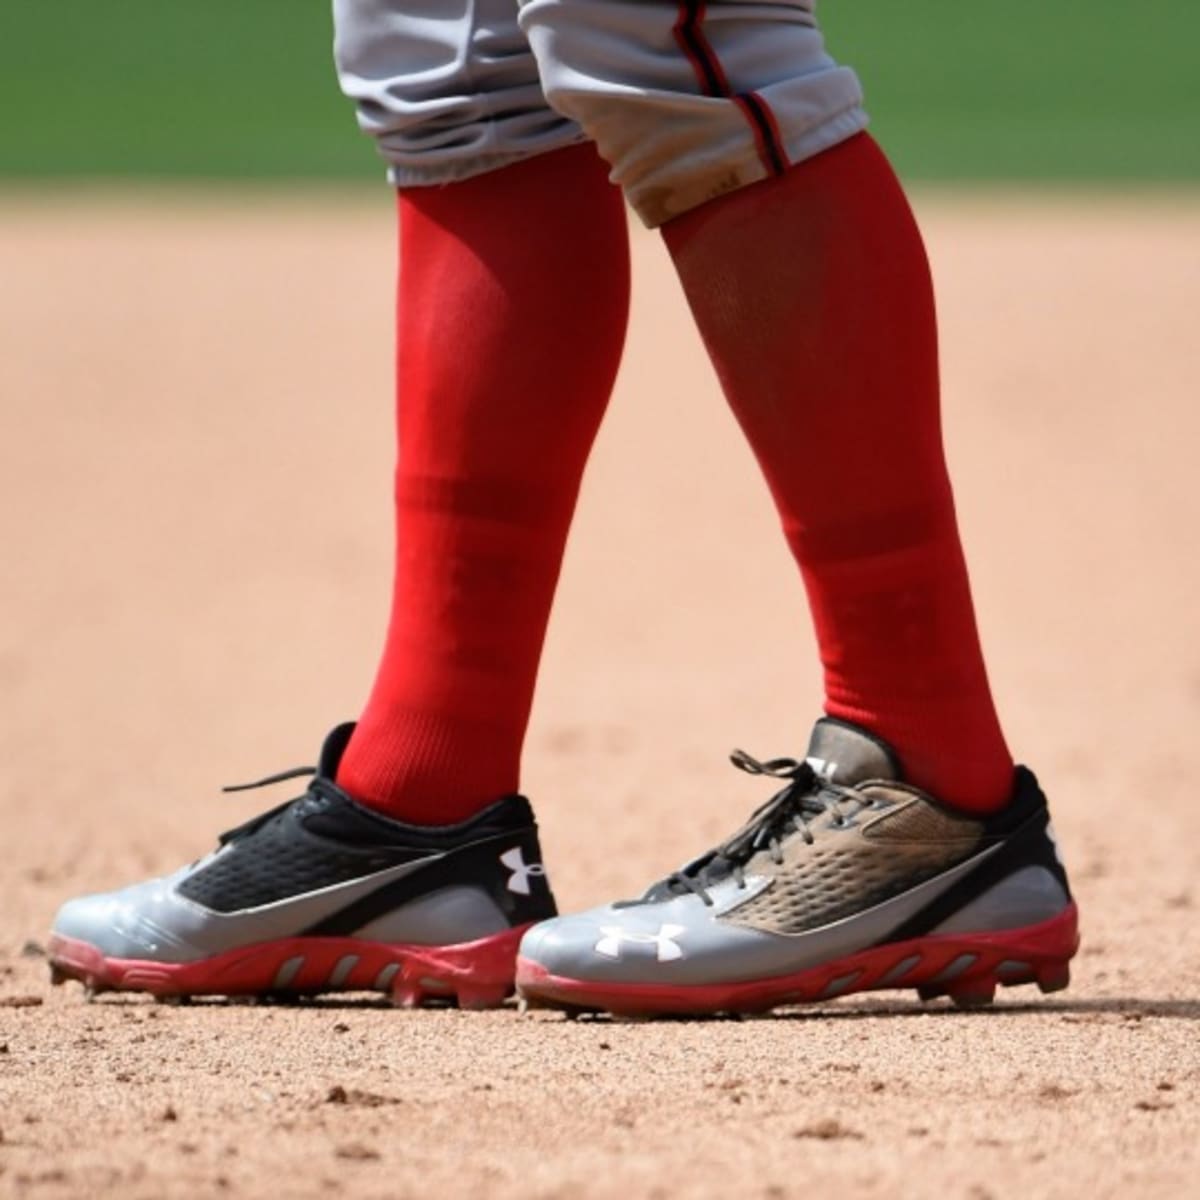 Bryce Harper's Under Armour Cleats Get Special Design - Sports Illustrated  FanNation Kicks News, Analysis and More